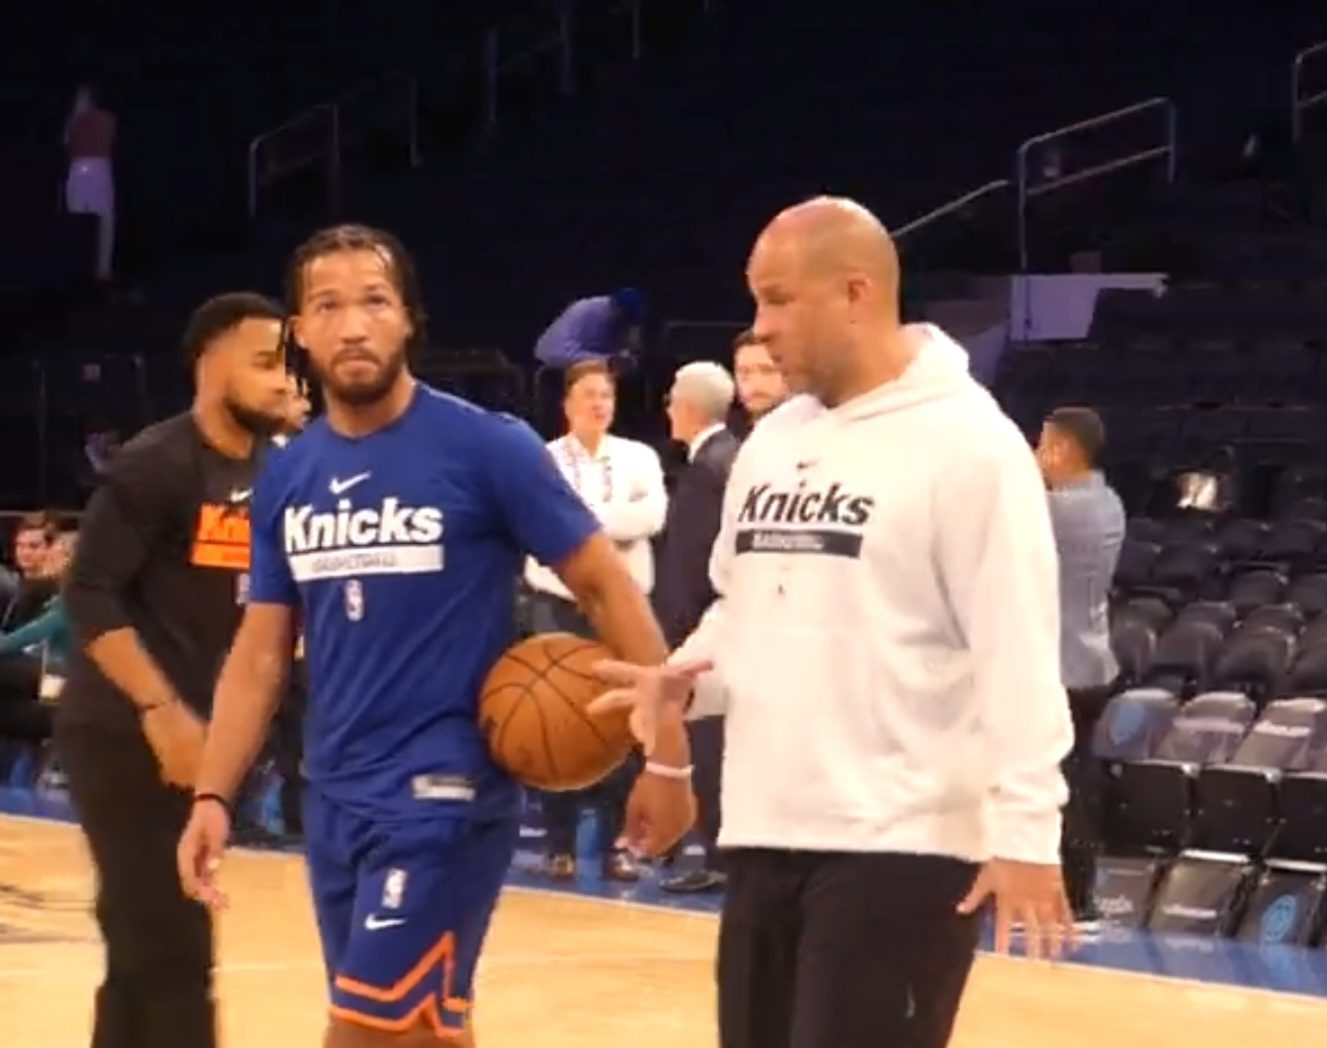 New York Knicks star Jalen Brunson with his father Knicks assistant coach Rick Brunson (Photo by Derrel Jazz Johnson for rolling out)